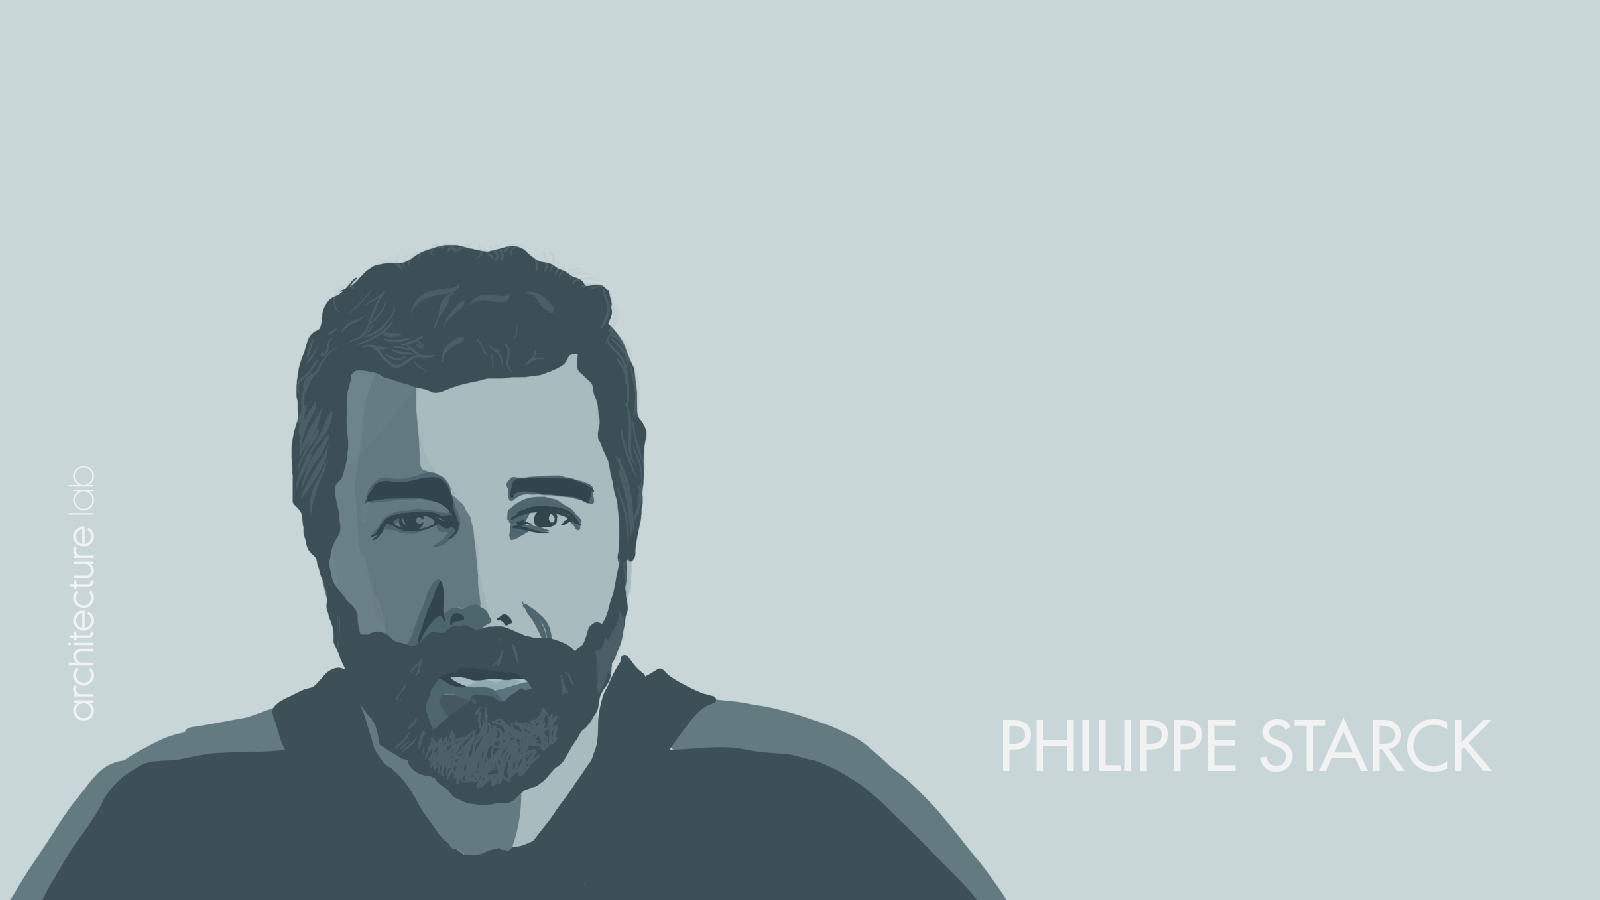 Philippe starck: biography, works, awards